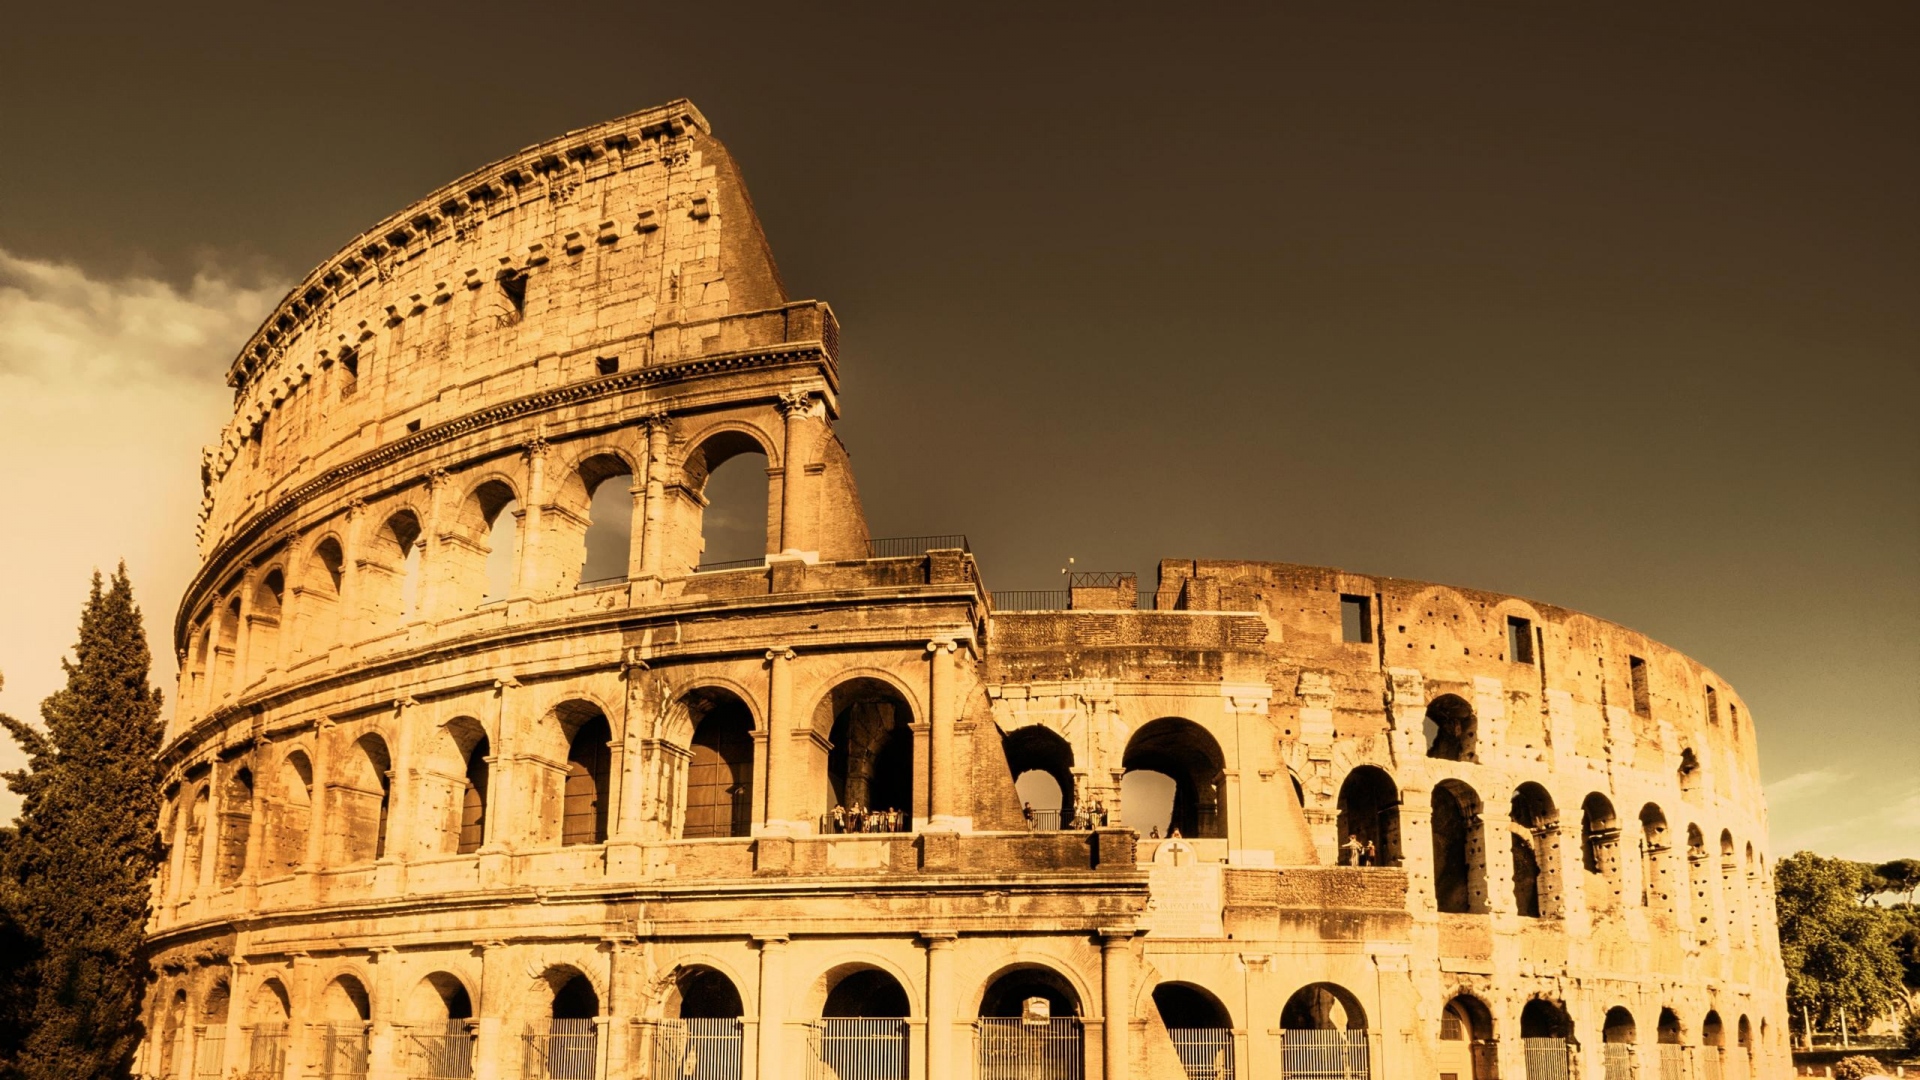  Wallpaper colosseum rome italy architecture monument history 1920x1080